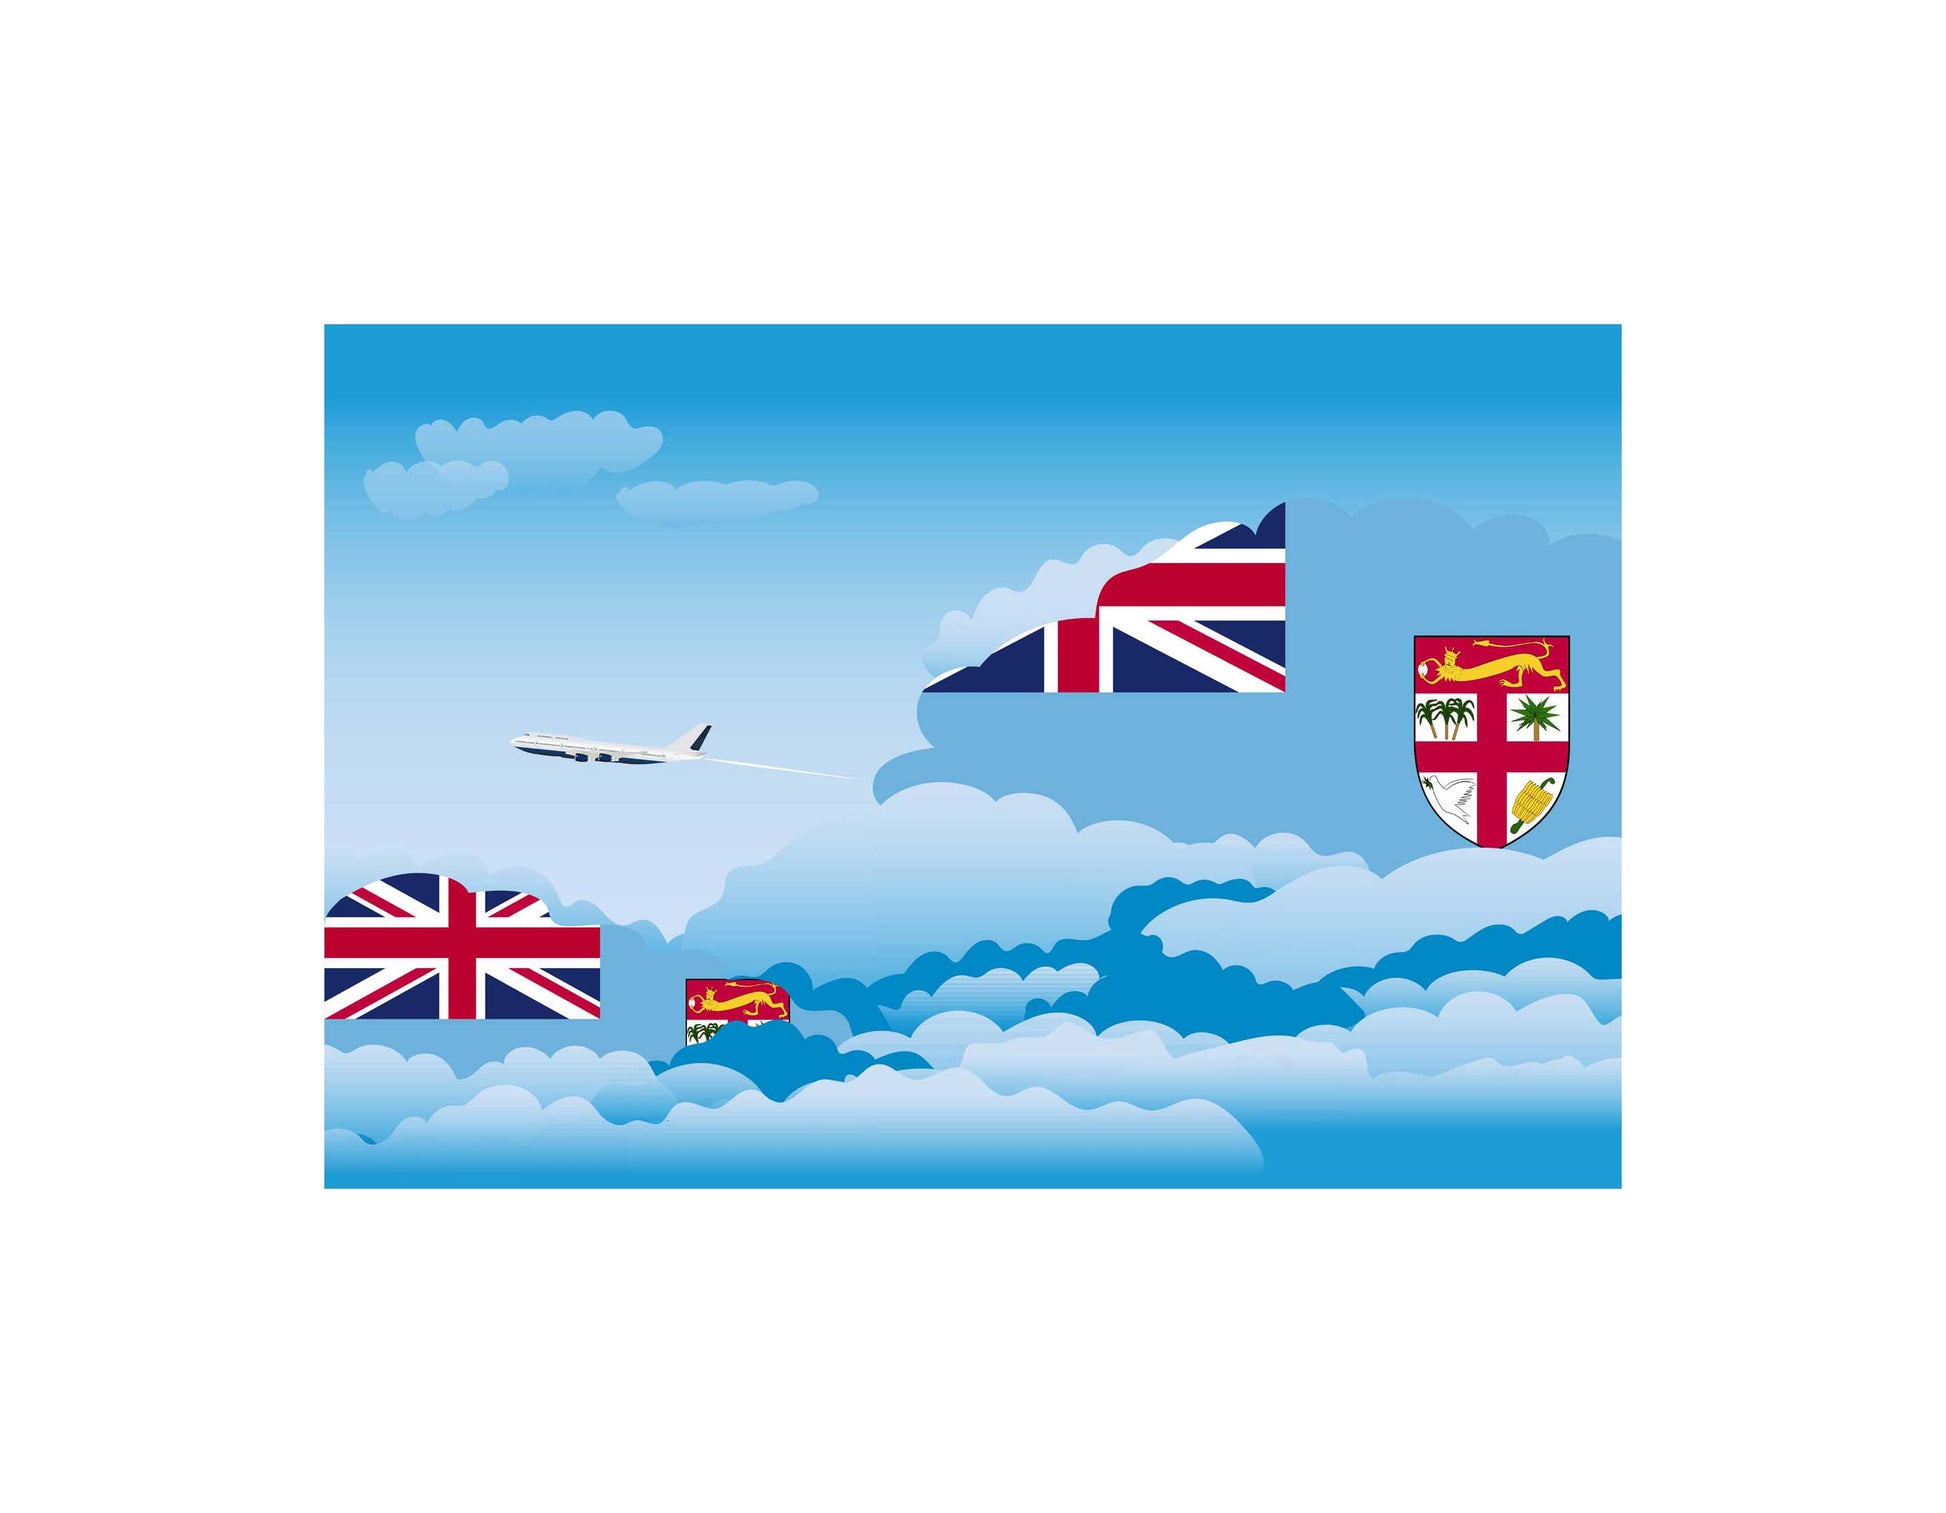 Fiji Flag Day Clouds Aeroplane Airport Flying Vector Illustration